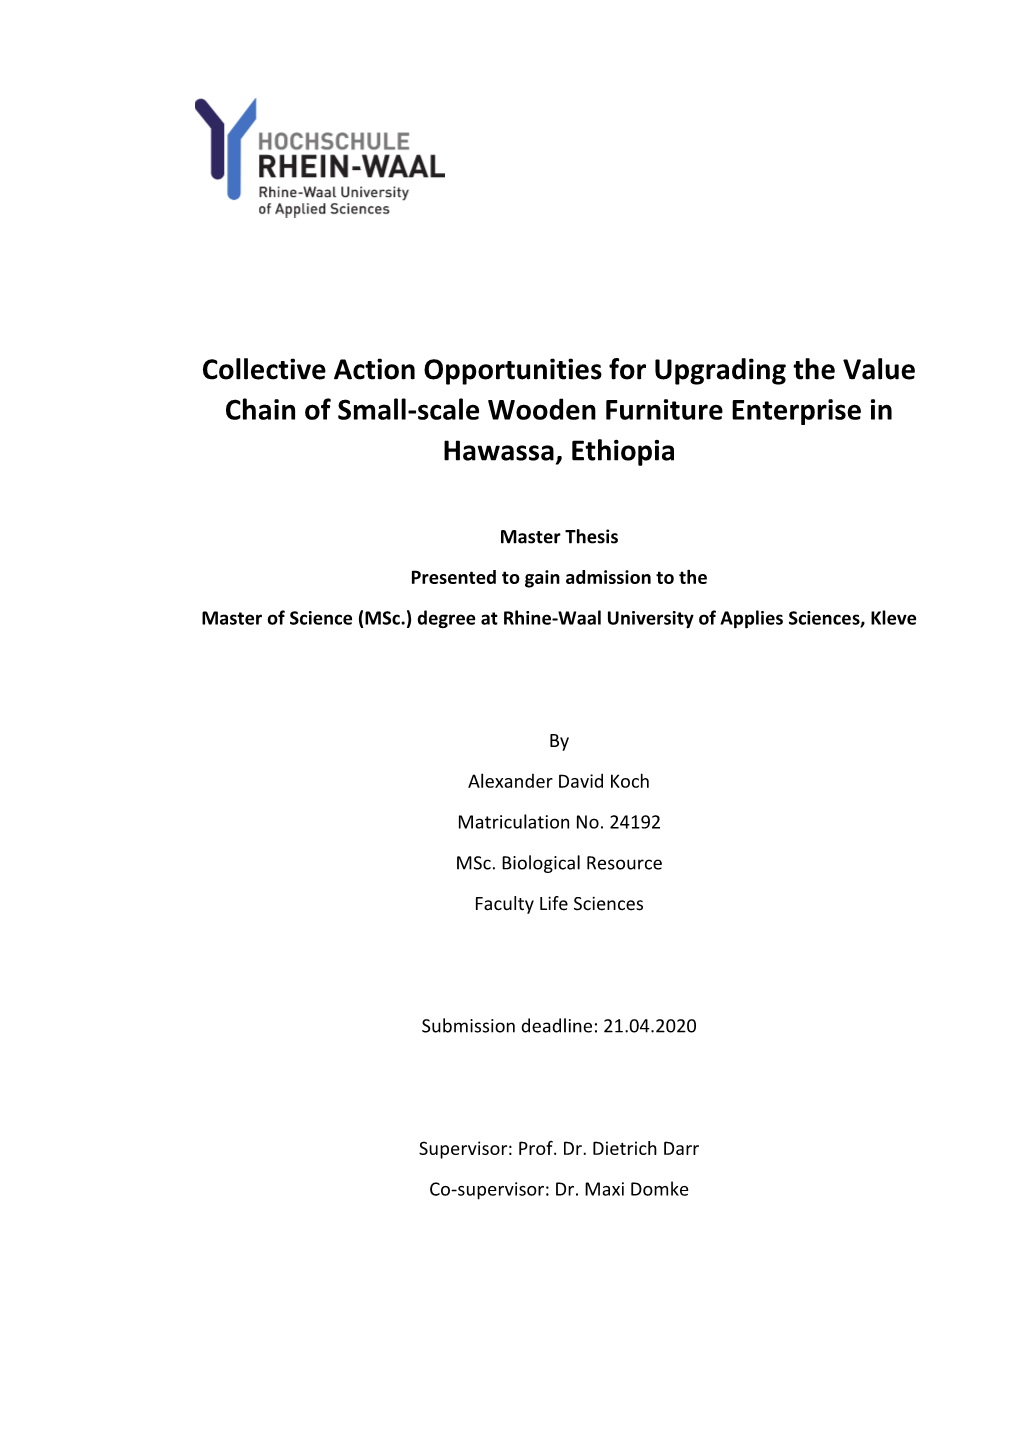 Collective Action Opportunities for Upgrading the Value Chain of Small-Scale Wooden Furniture Enterprise in Hawassa, Ethiopia